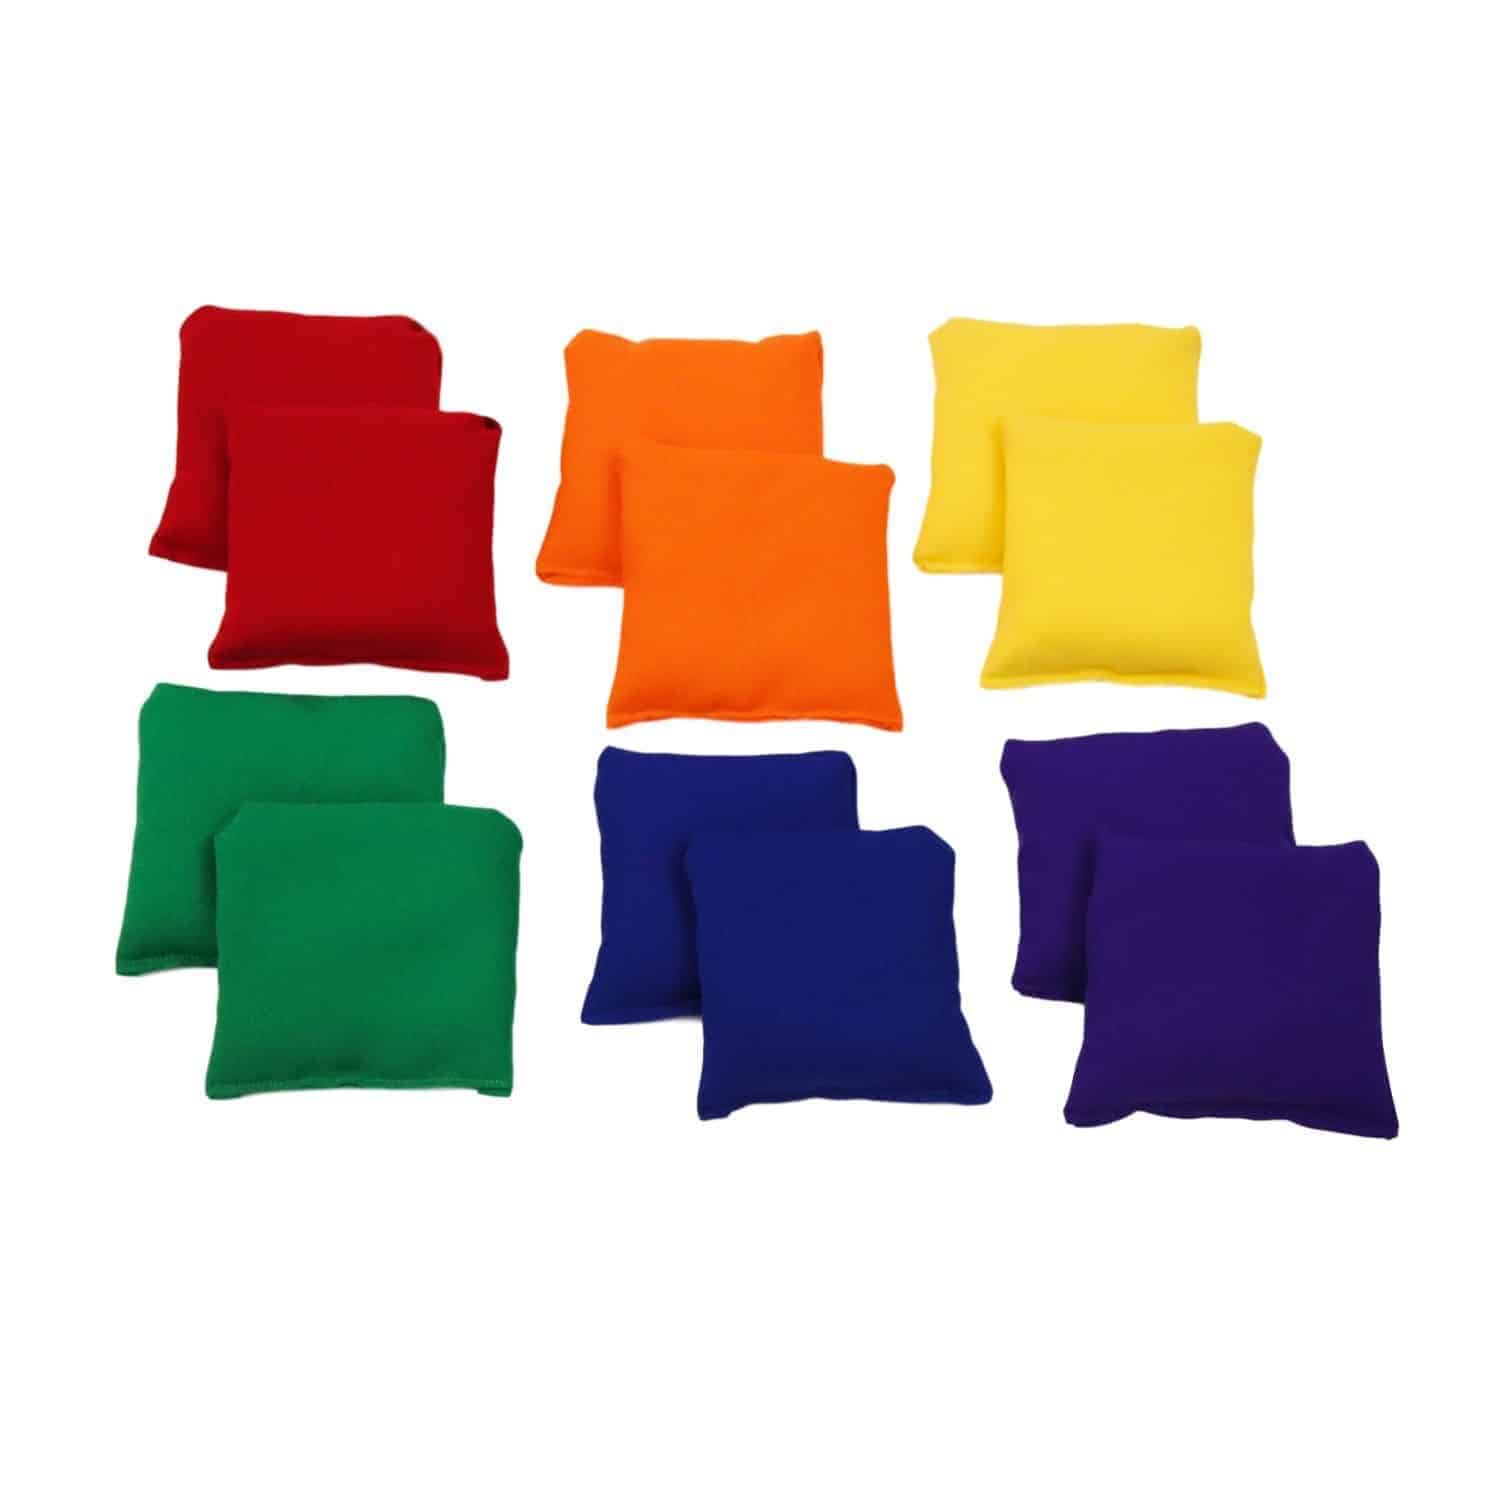 Top Creative Movement Products Music Therapy Four Inch Square Bean Bags in Six Colors